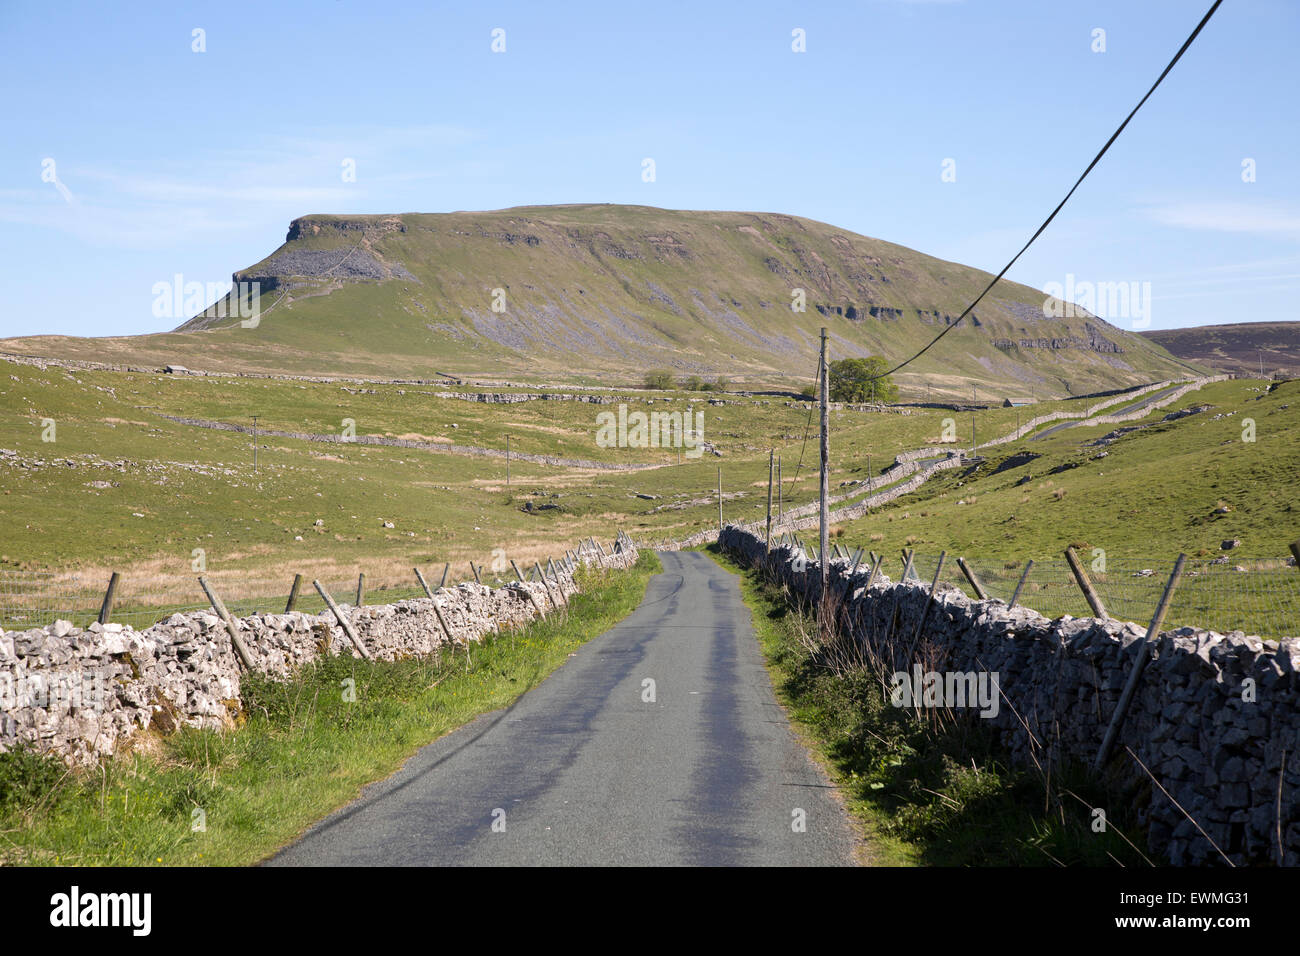 Road and dry stonewalls, Pen Y Ghent, Yorkshire Dales national park, England, UK Stock Photo